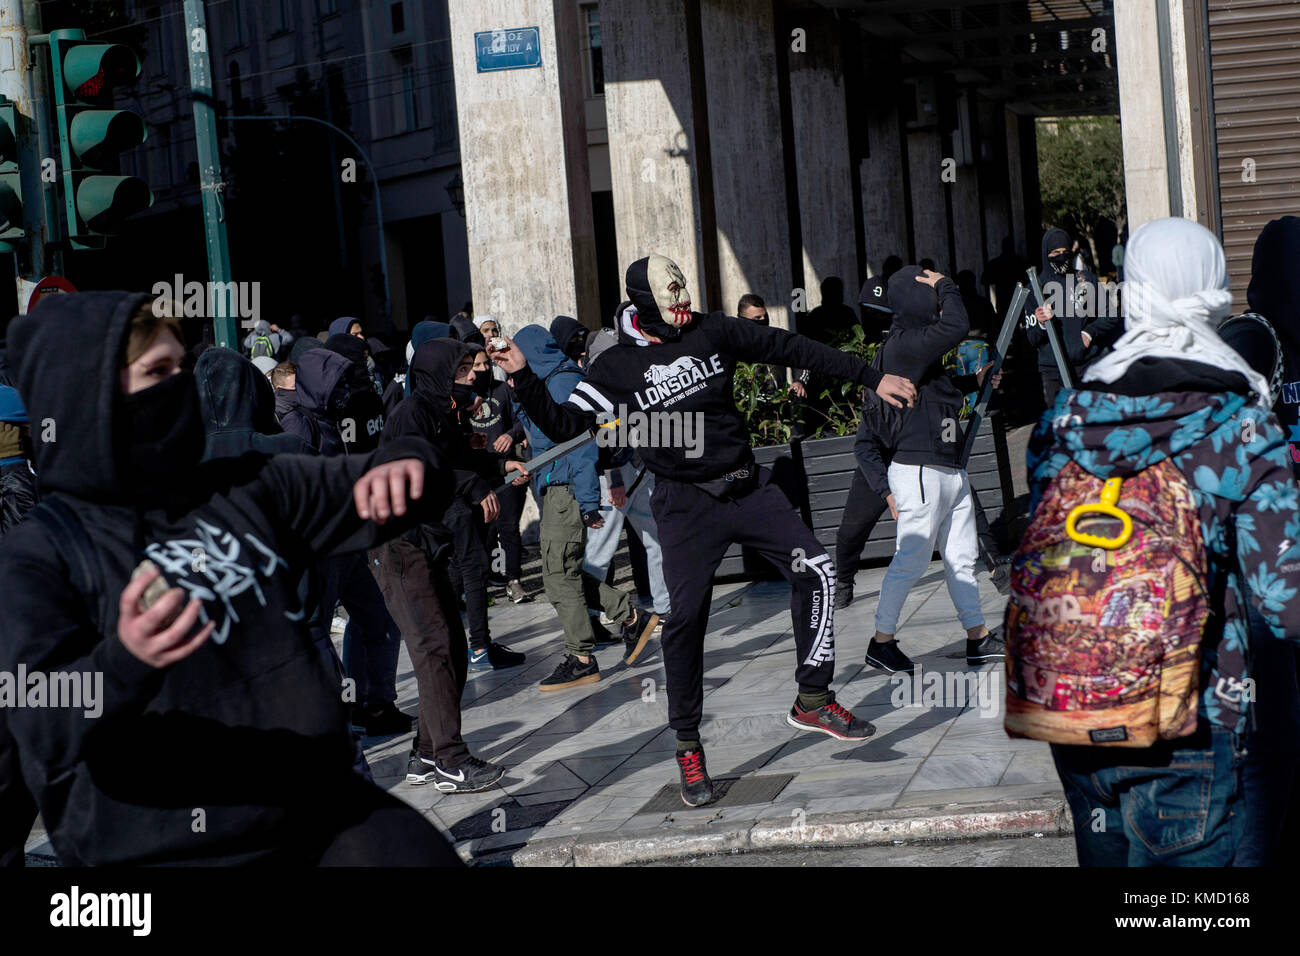 Athens, Greece. 6th Dec, 2017. Masked people can be seen partaking in a protest match in Athens, Greece, 6 December 2017. The ninth anniversary of the death of a 15 year old by police bullet was marked by riots. Some 200 masked persons threw stones against the police, devastated shops and cafés and lit some trash containers on fire. Credit: Angelos Tzortzinis/dpa/Alamy Live News Stock Photo